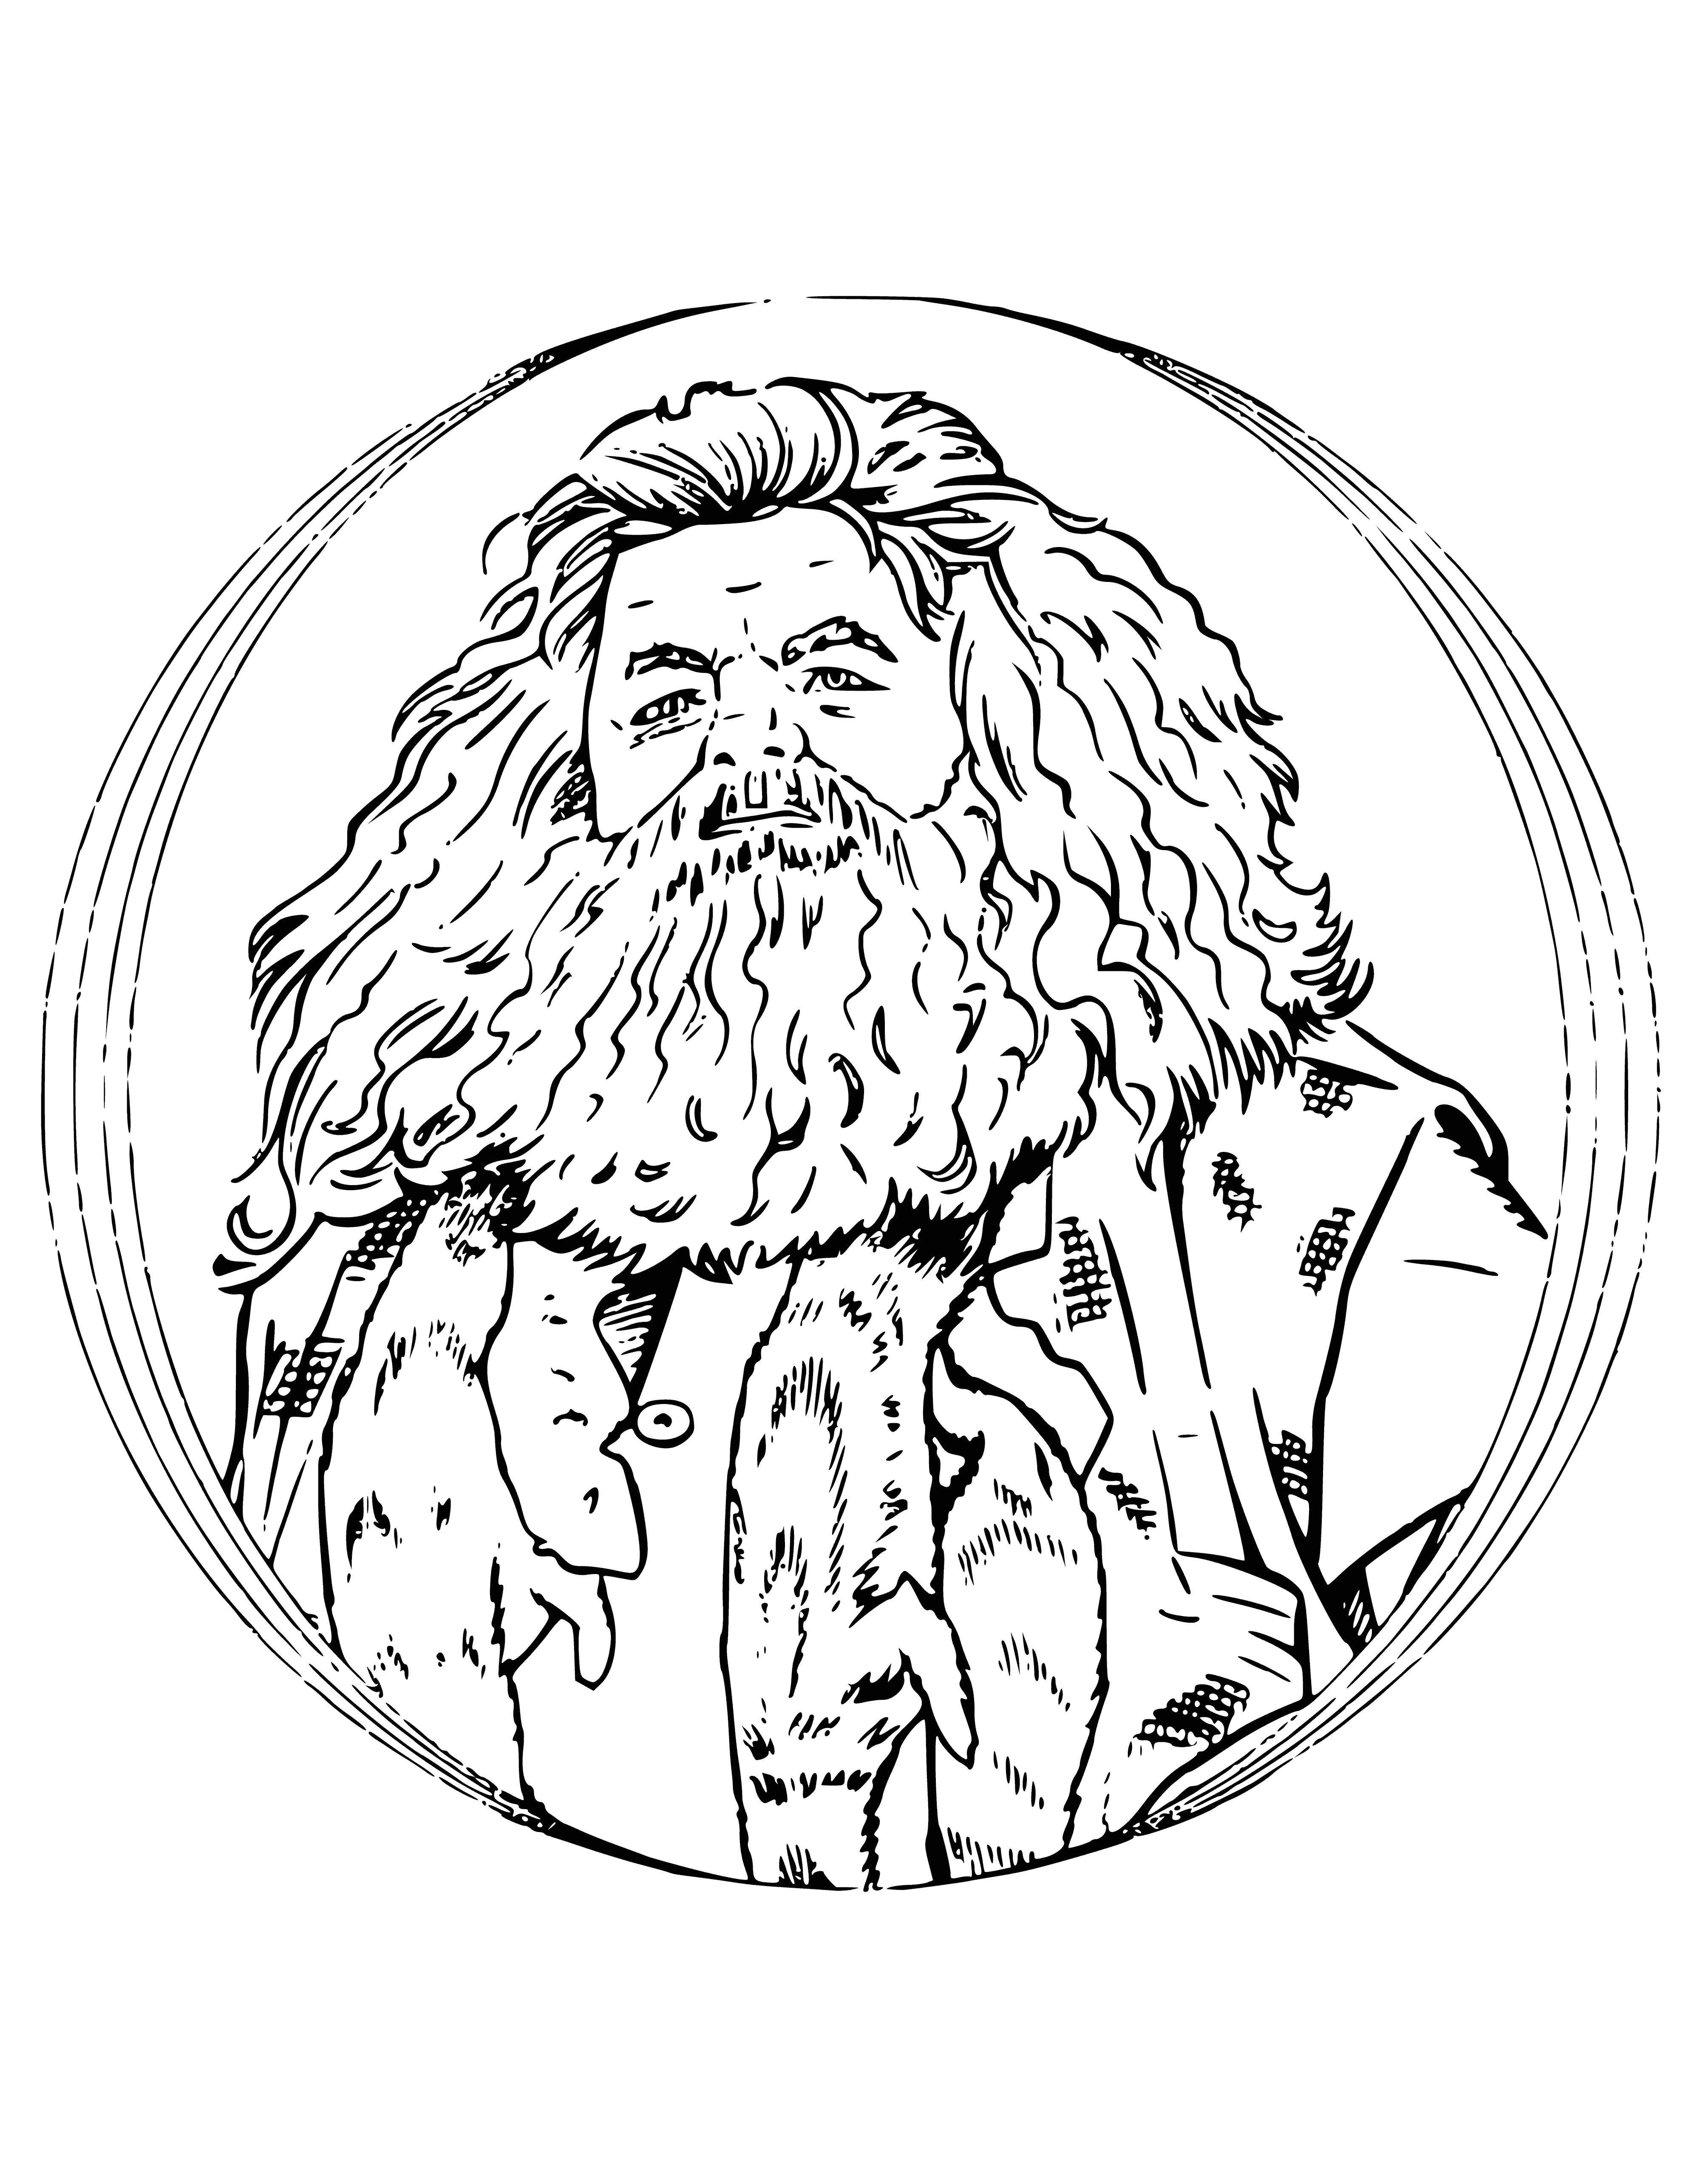 coloring page: A wild-looking, large man in robes and a long coat, holding a wand. Perfectly at home in the woods than a wizarding school.